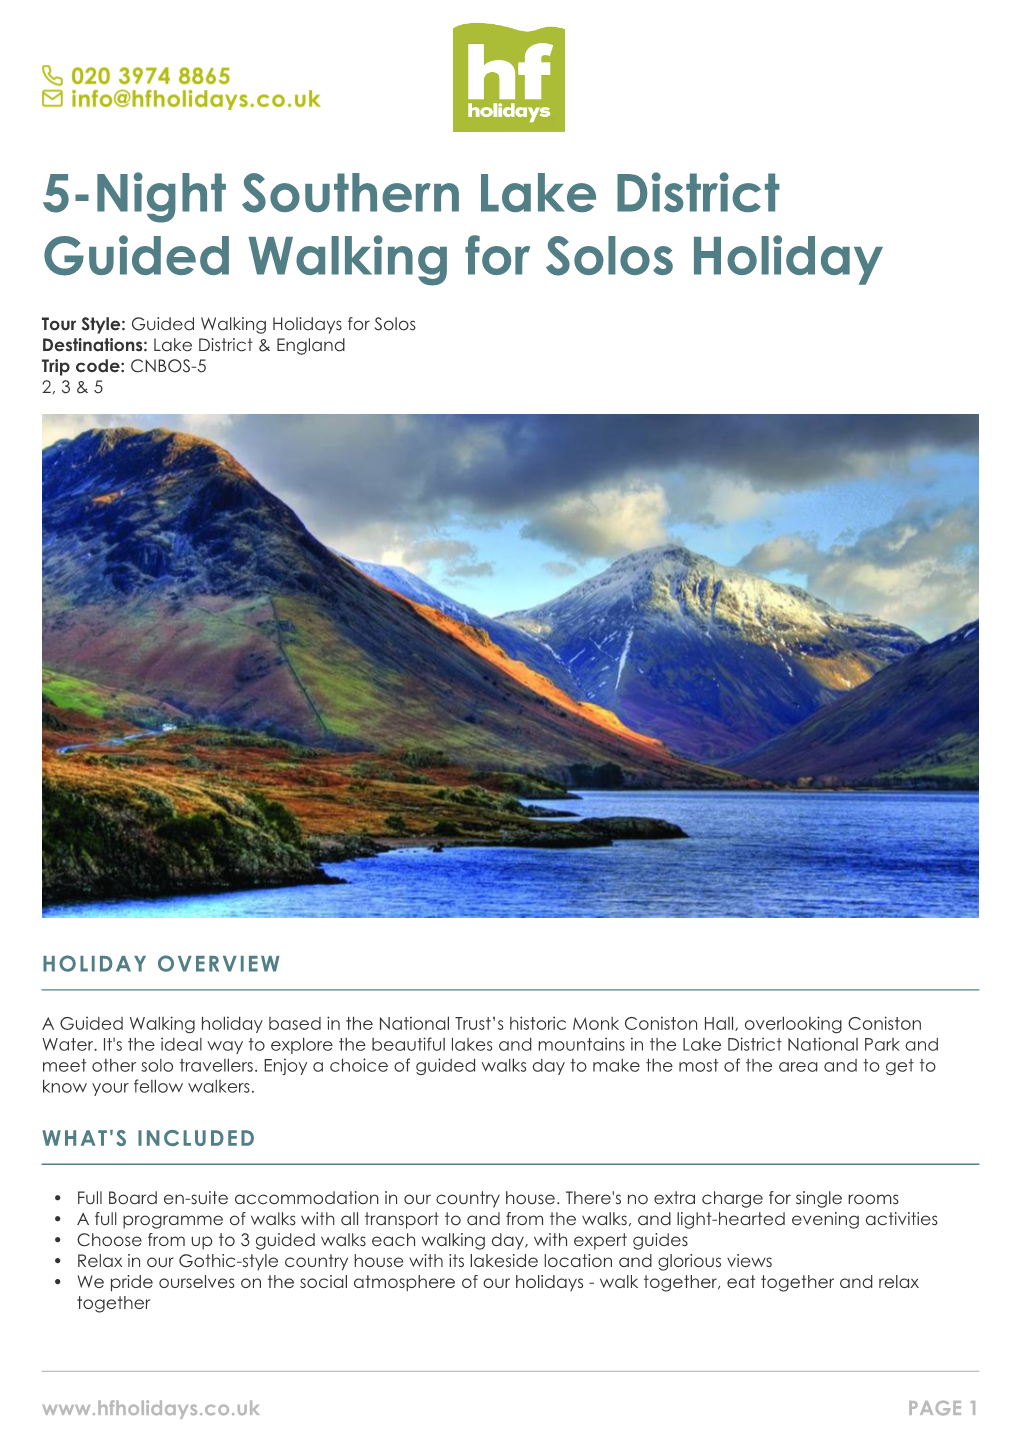 5-Night Southern Lake District Guided Walking for Solos Holiday